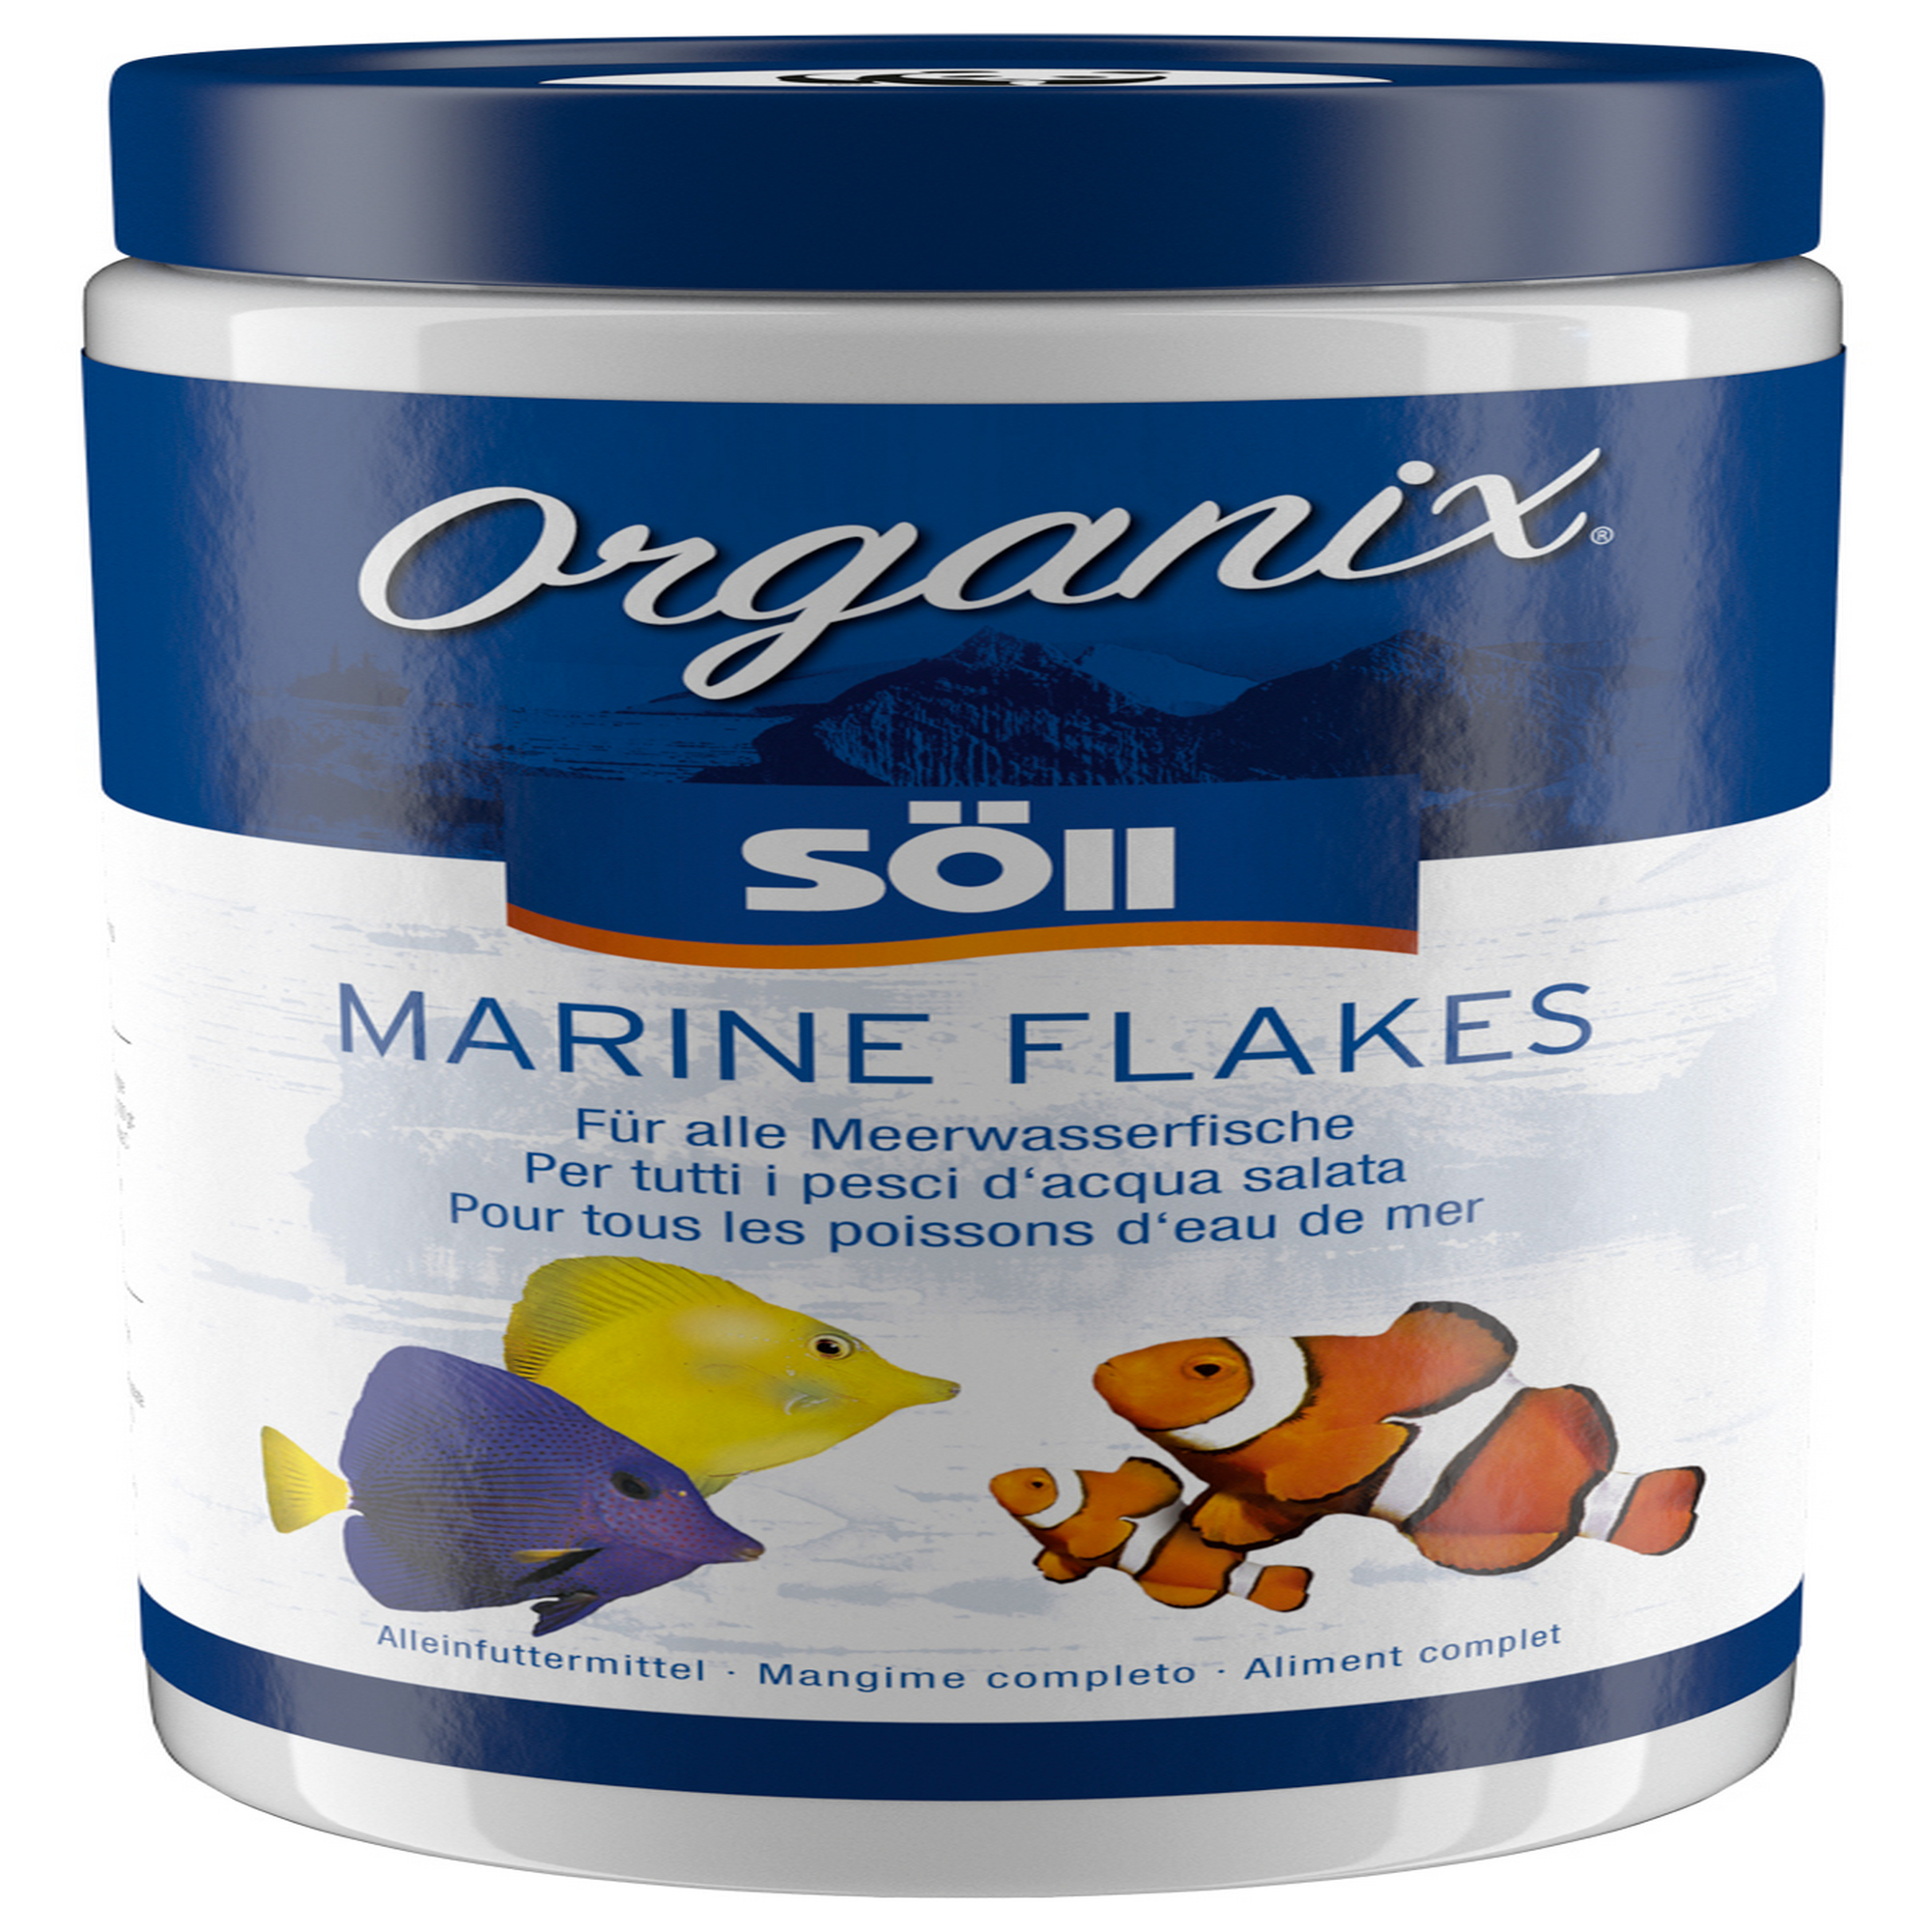 Organix Marine Flakes 1 l + product picture